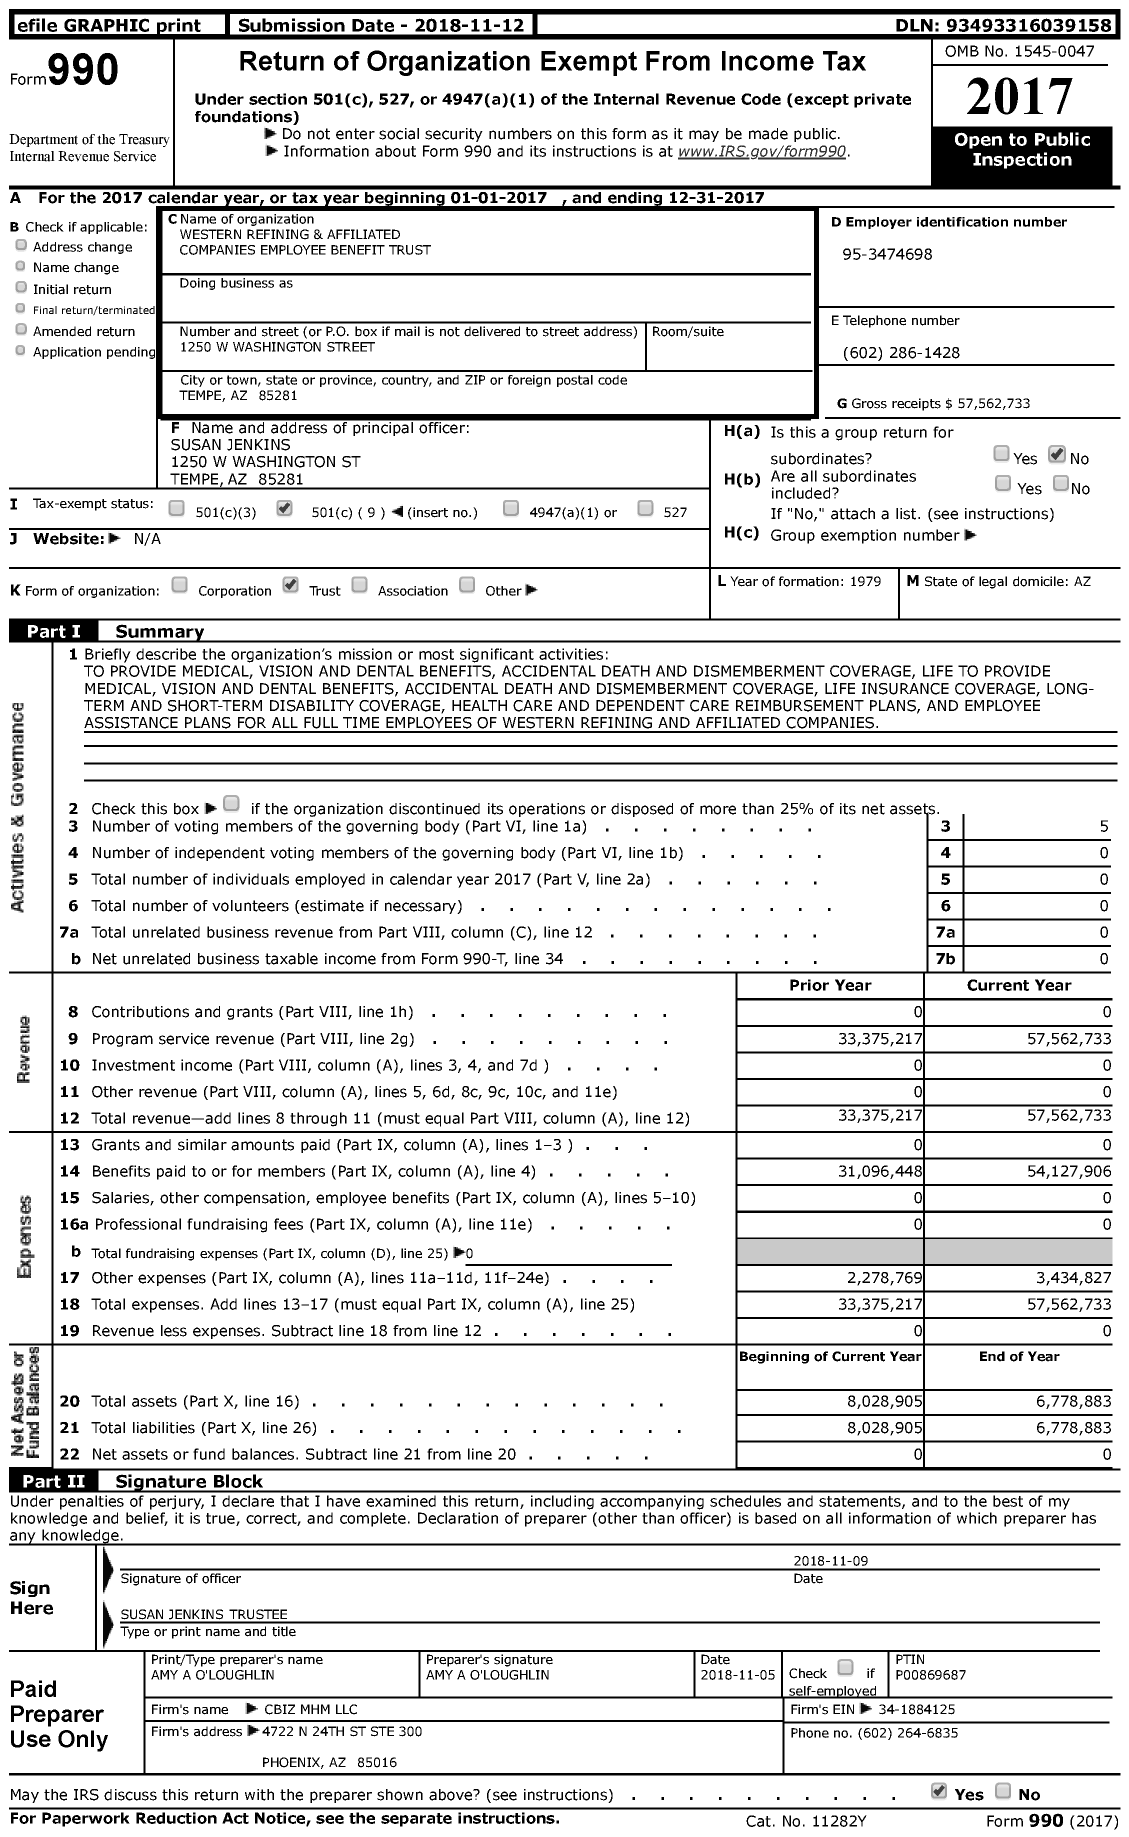 Image of first page of 2017 Form 990 for WESTERN REFINING and AFFILIATED COMPANIES employee BENEFIT TRUST